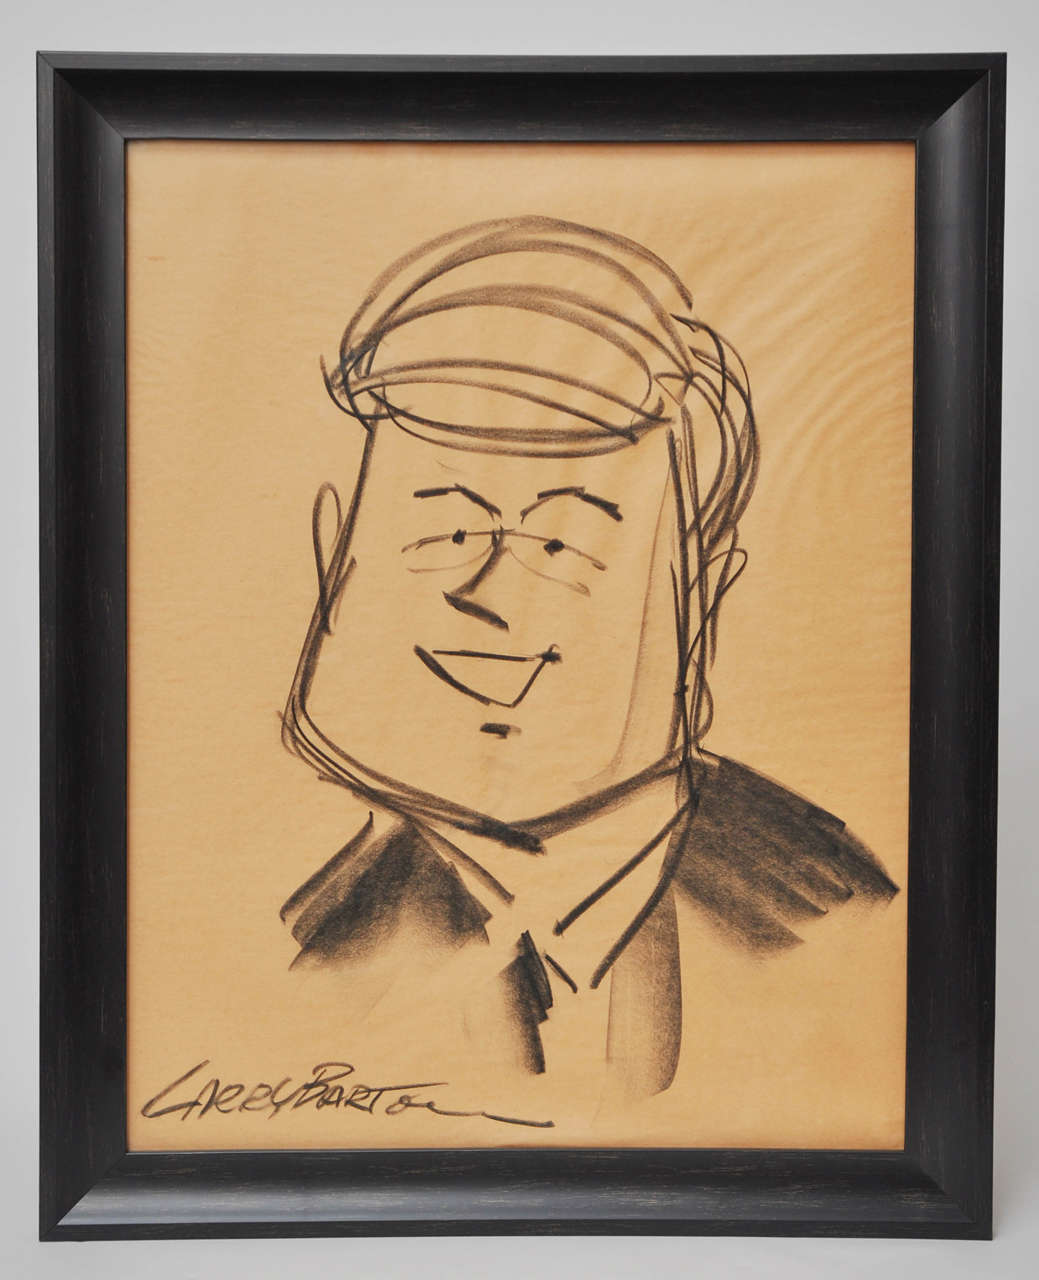 A wonderfully whimsical drawing of JFK on paper. Newly framed. Signed by Larry Barton.